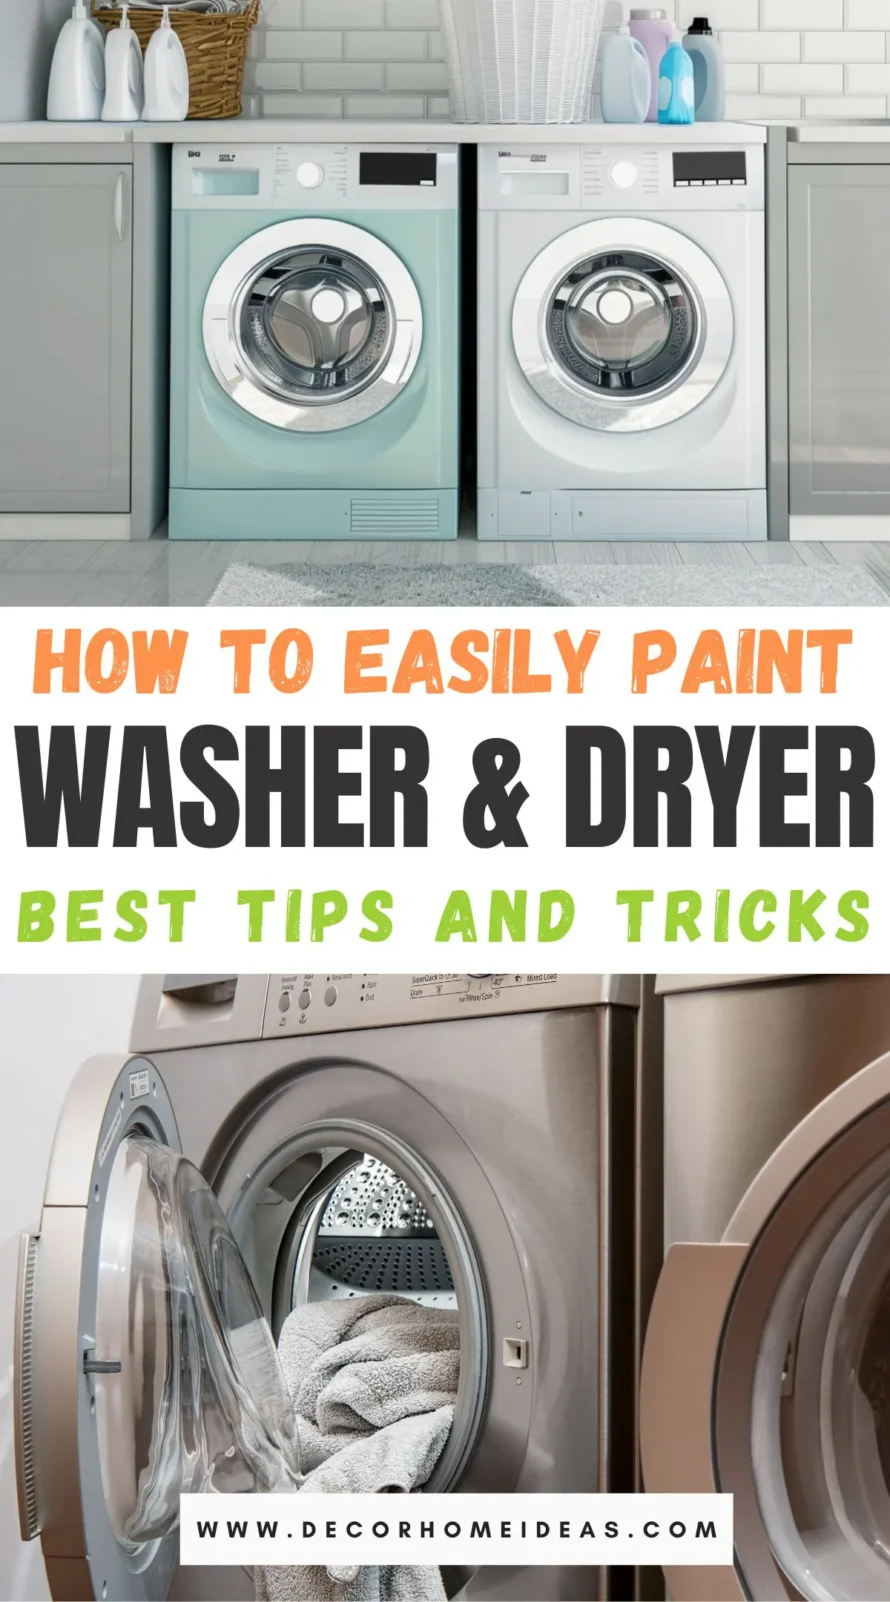 Transform your laundry room with a fresh look by learning how to easily paint your washer and dryer. This step-by-step guide covers all the essentials, from choosing the right paint to prepping the surface and applying the perfect finish. Discover tips and tricks for a professional-looking result that lasts. Curious about the process and the stunning before-and-after photos? Dive in and start your DIY project today!